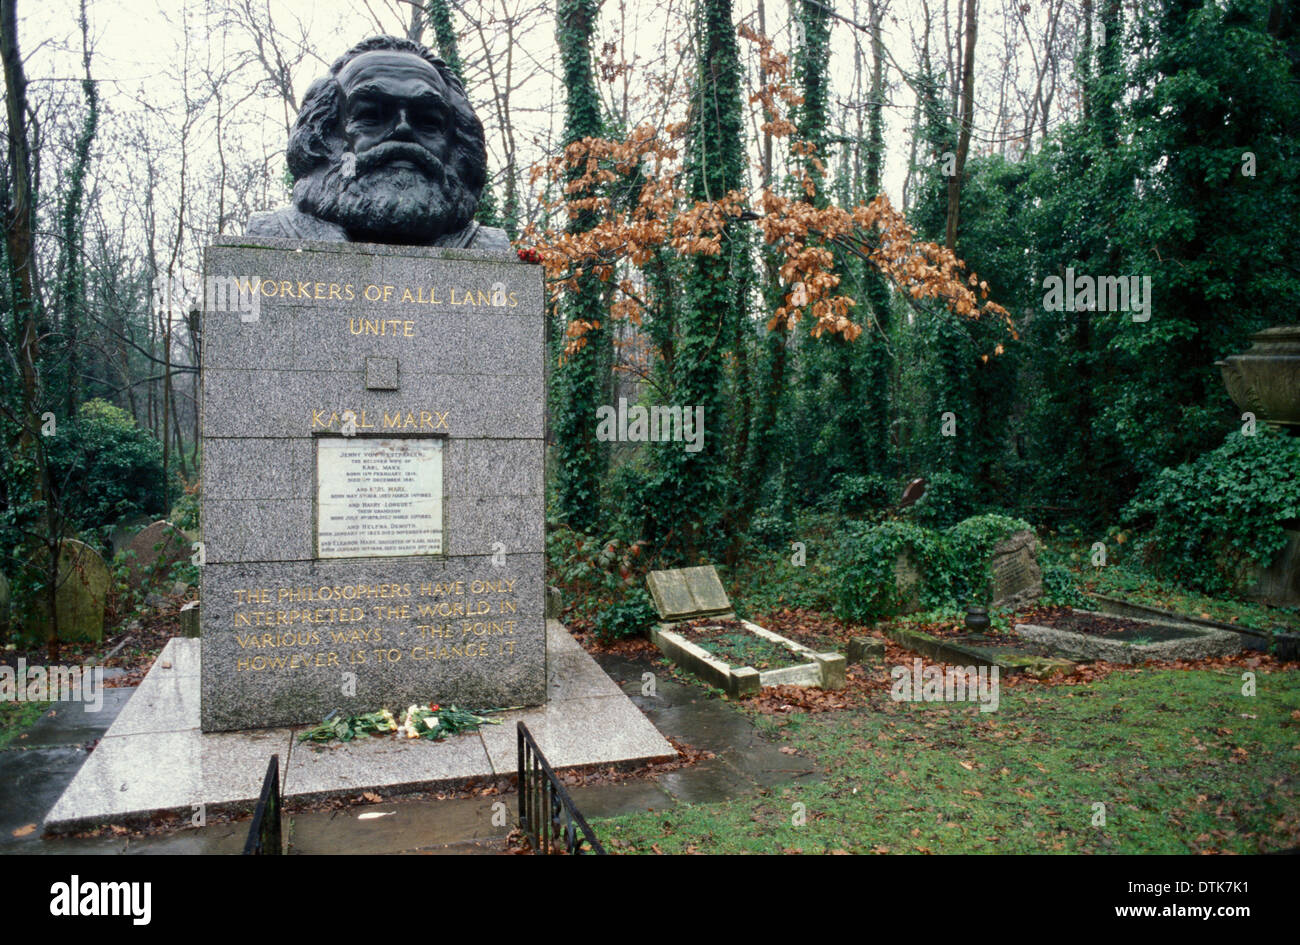 The grave of Karl Marx in Highgate cemetery, London. situated in th East Cemetery shot on film and scanned Stock Photo